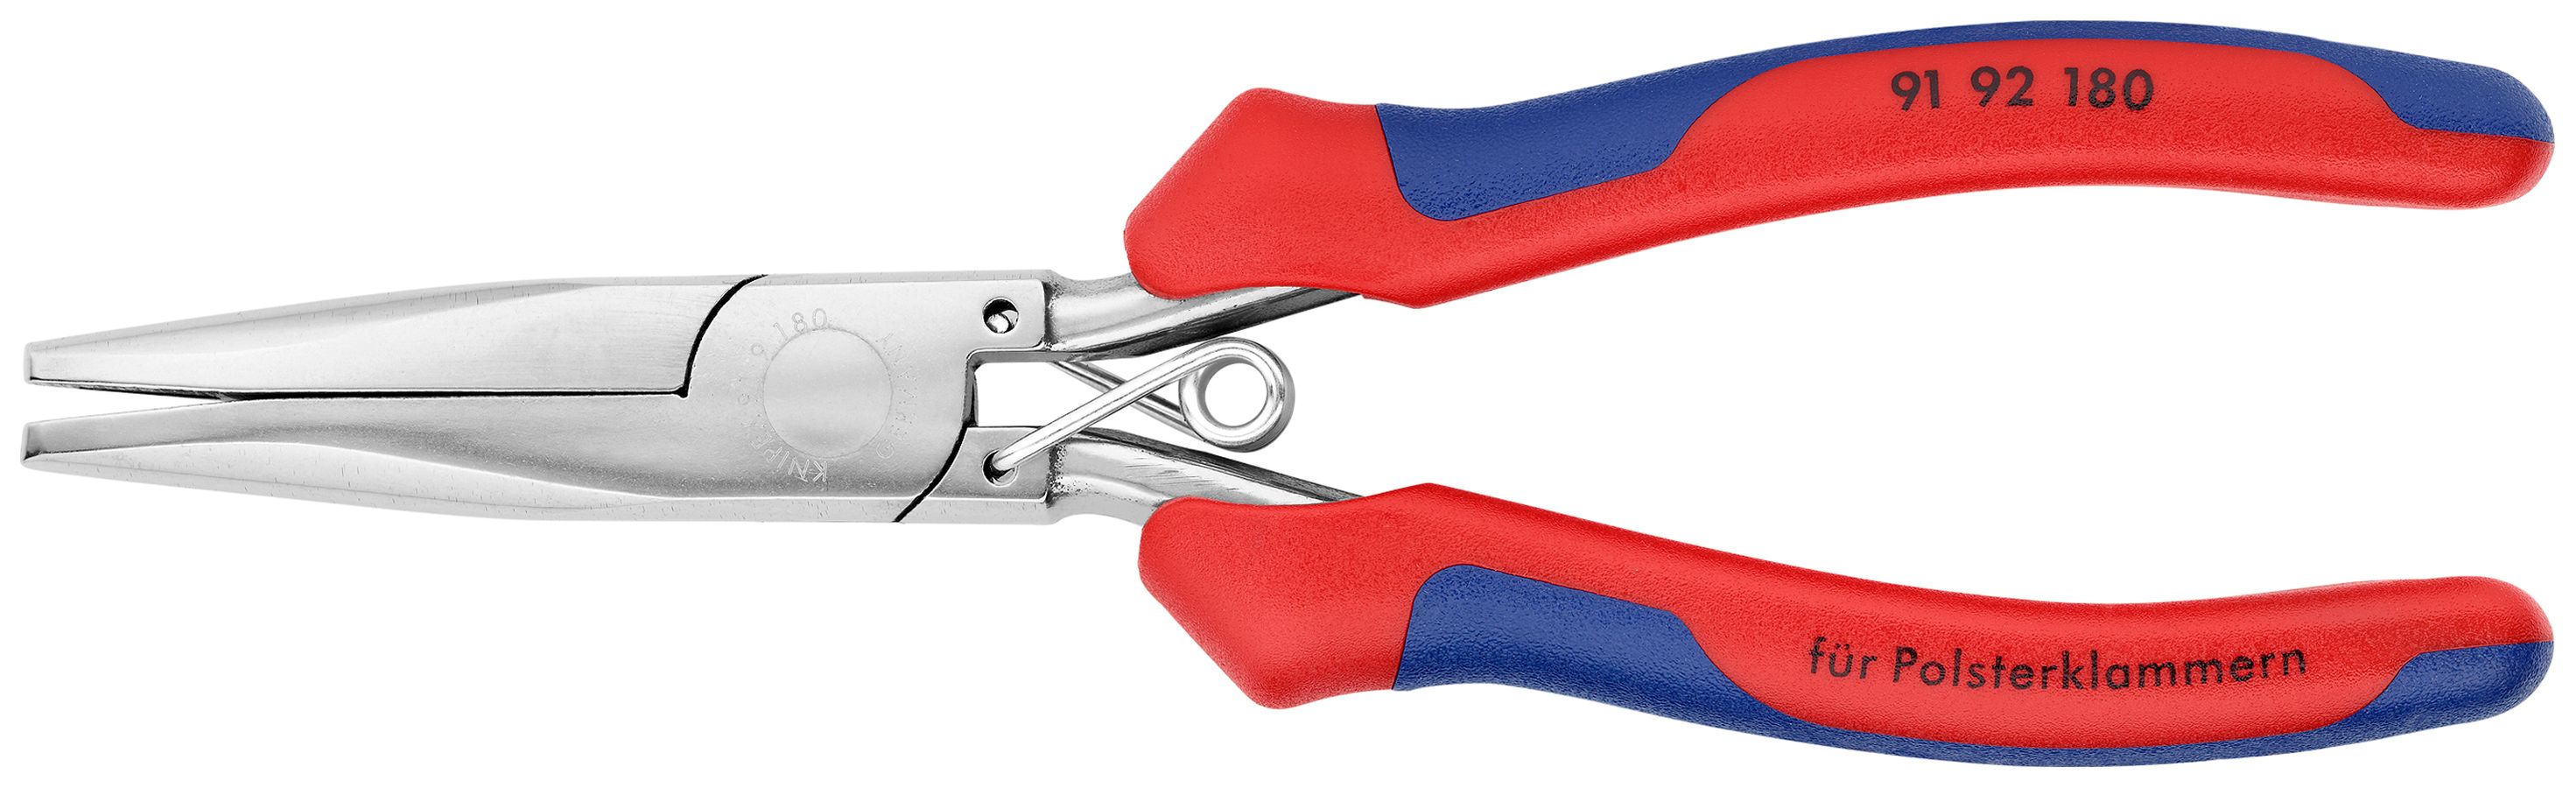 Gerich Wire Tightening Pliers Mesh Cage Pliers + 600 Pcs M-ring -  Walmart.com